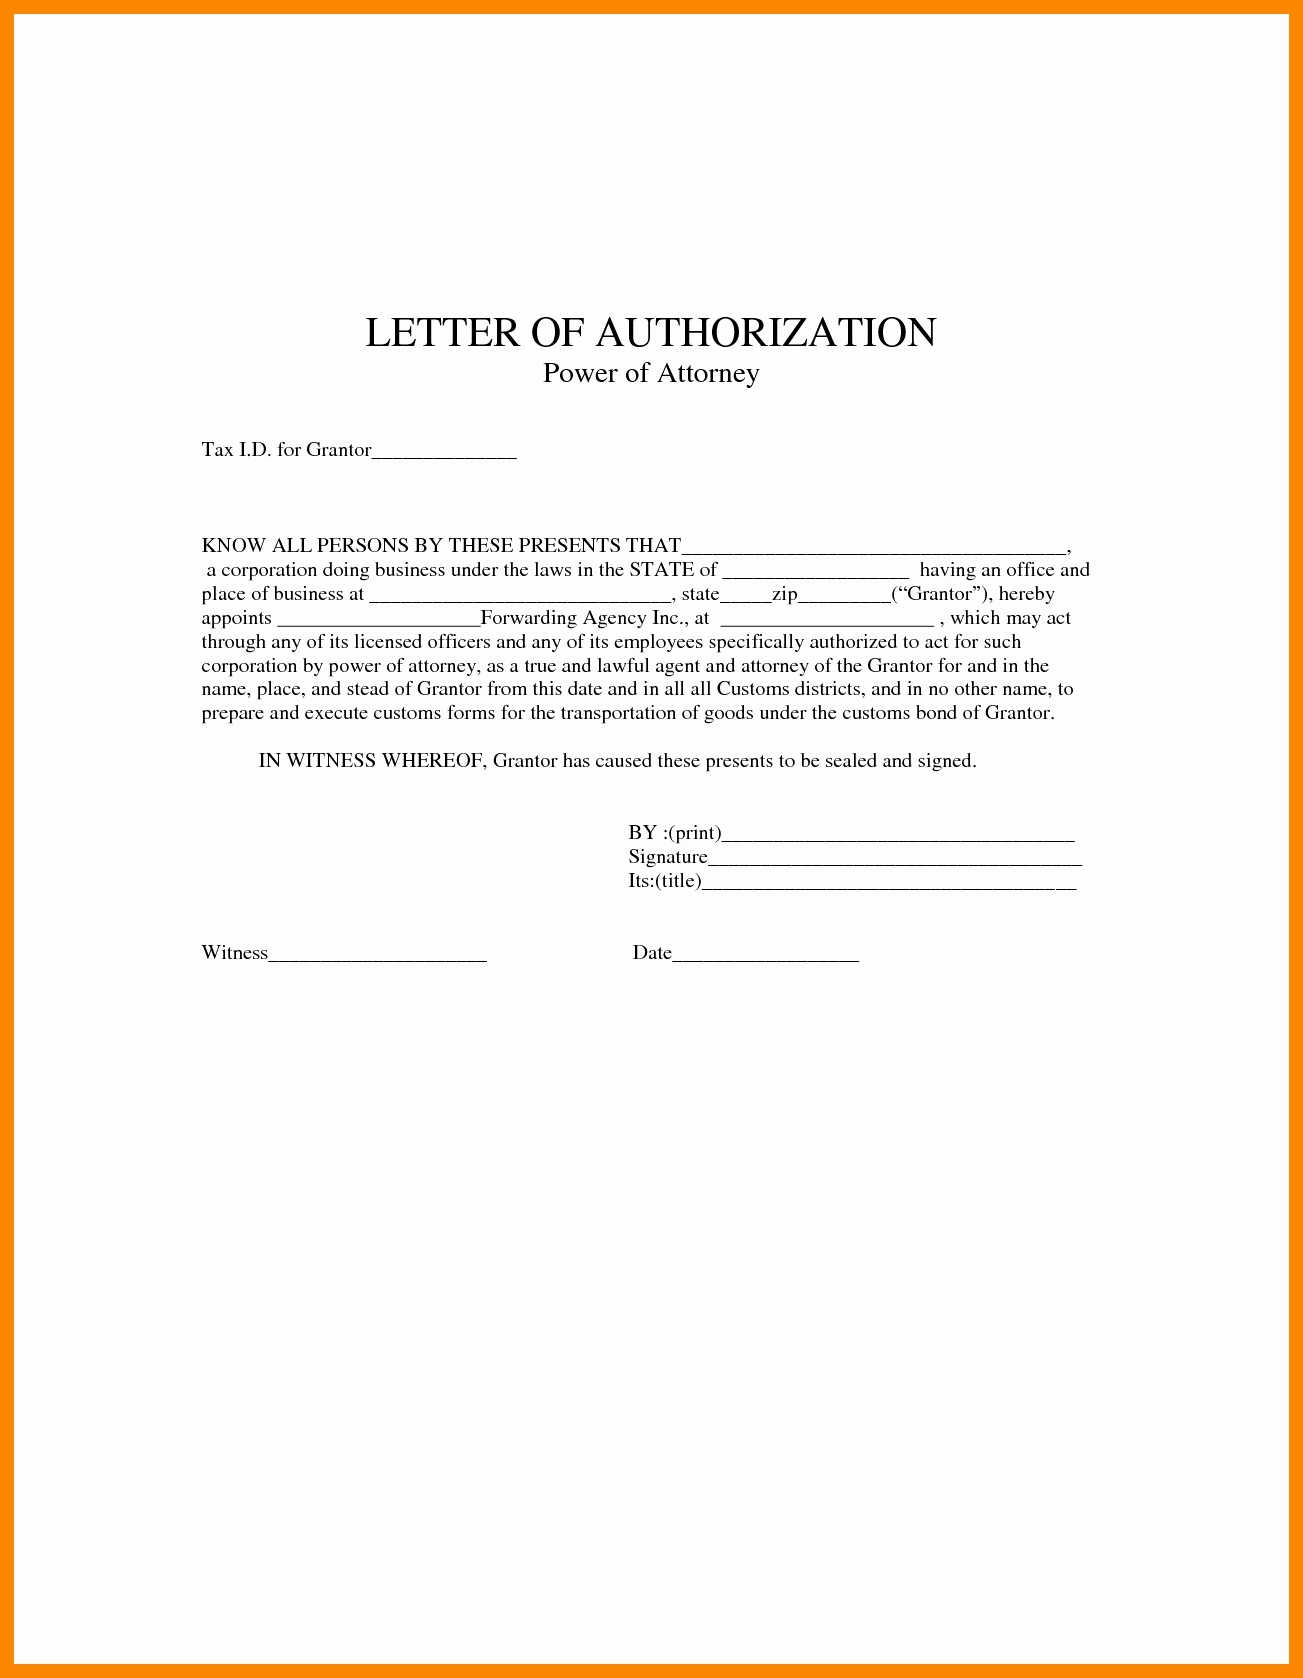 Power Of attorney Letter Template - Power Of attorney Letter Sample Acurnamedia